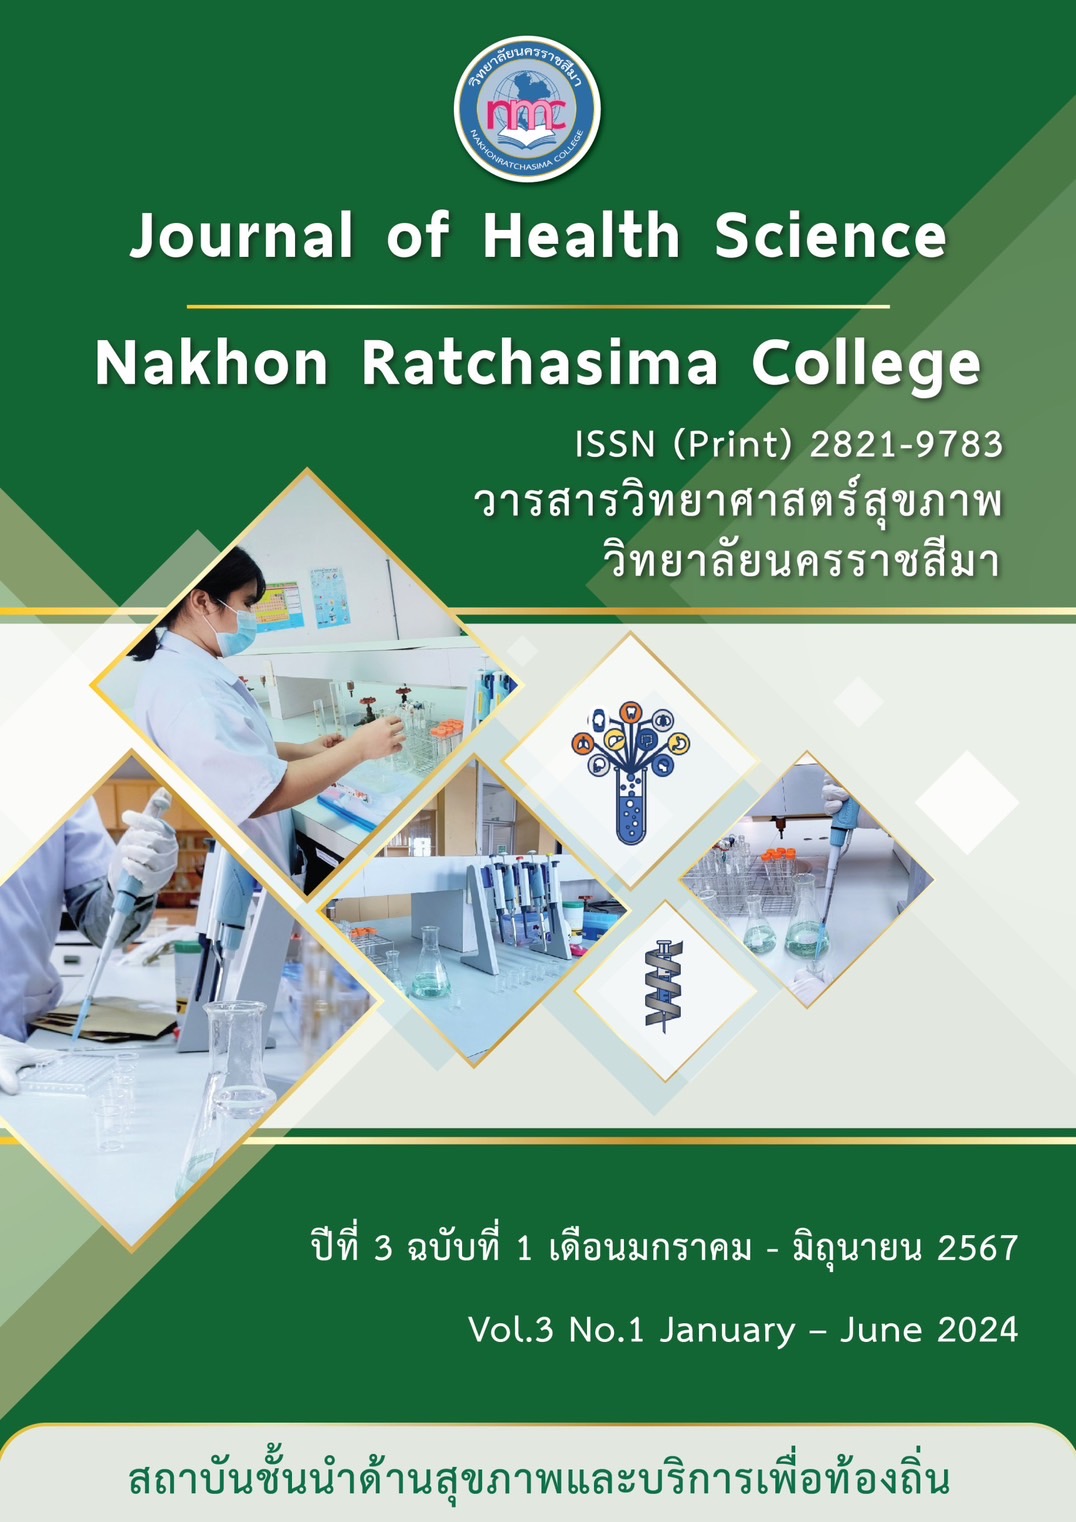 					View Vol. 3 No. 1 (2567): Journal of Health Science Nakhon Ratchasima College
				